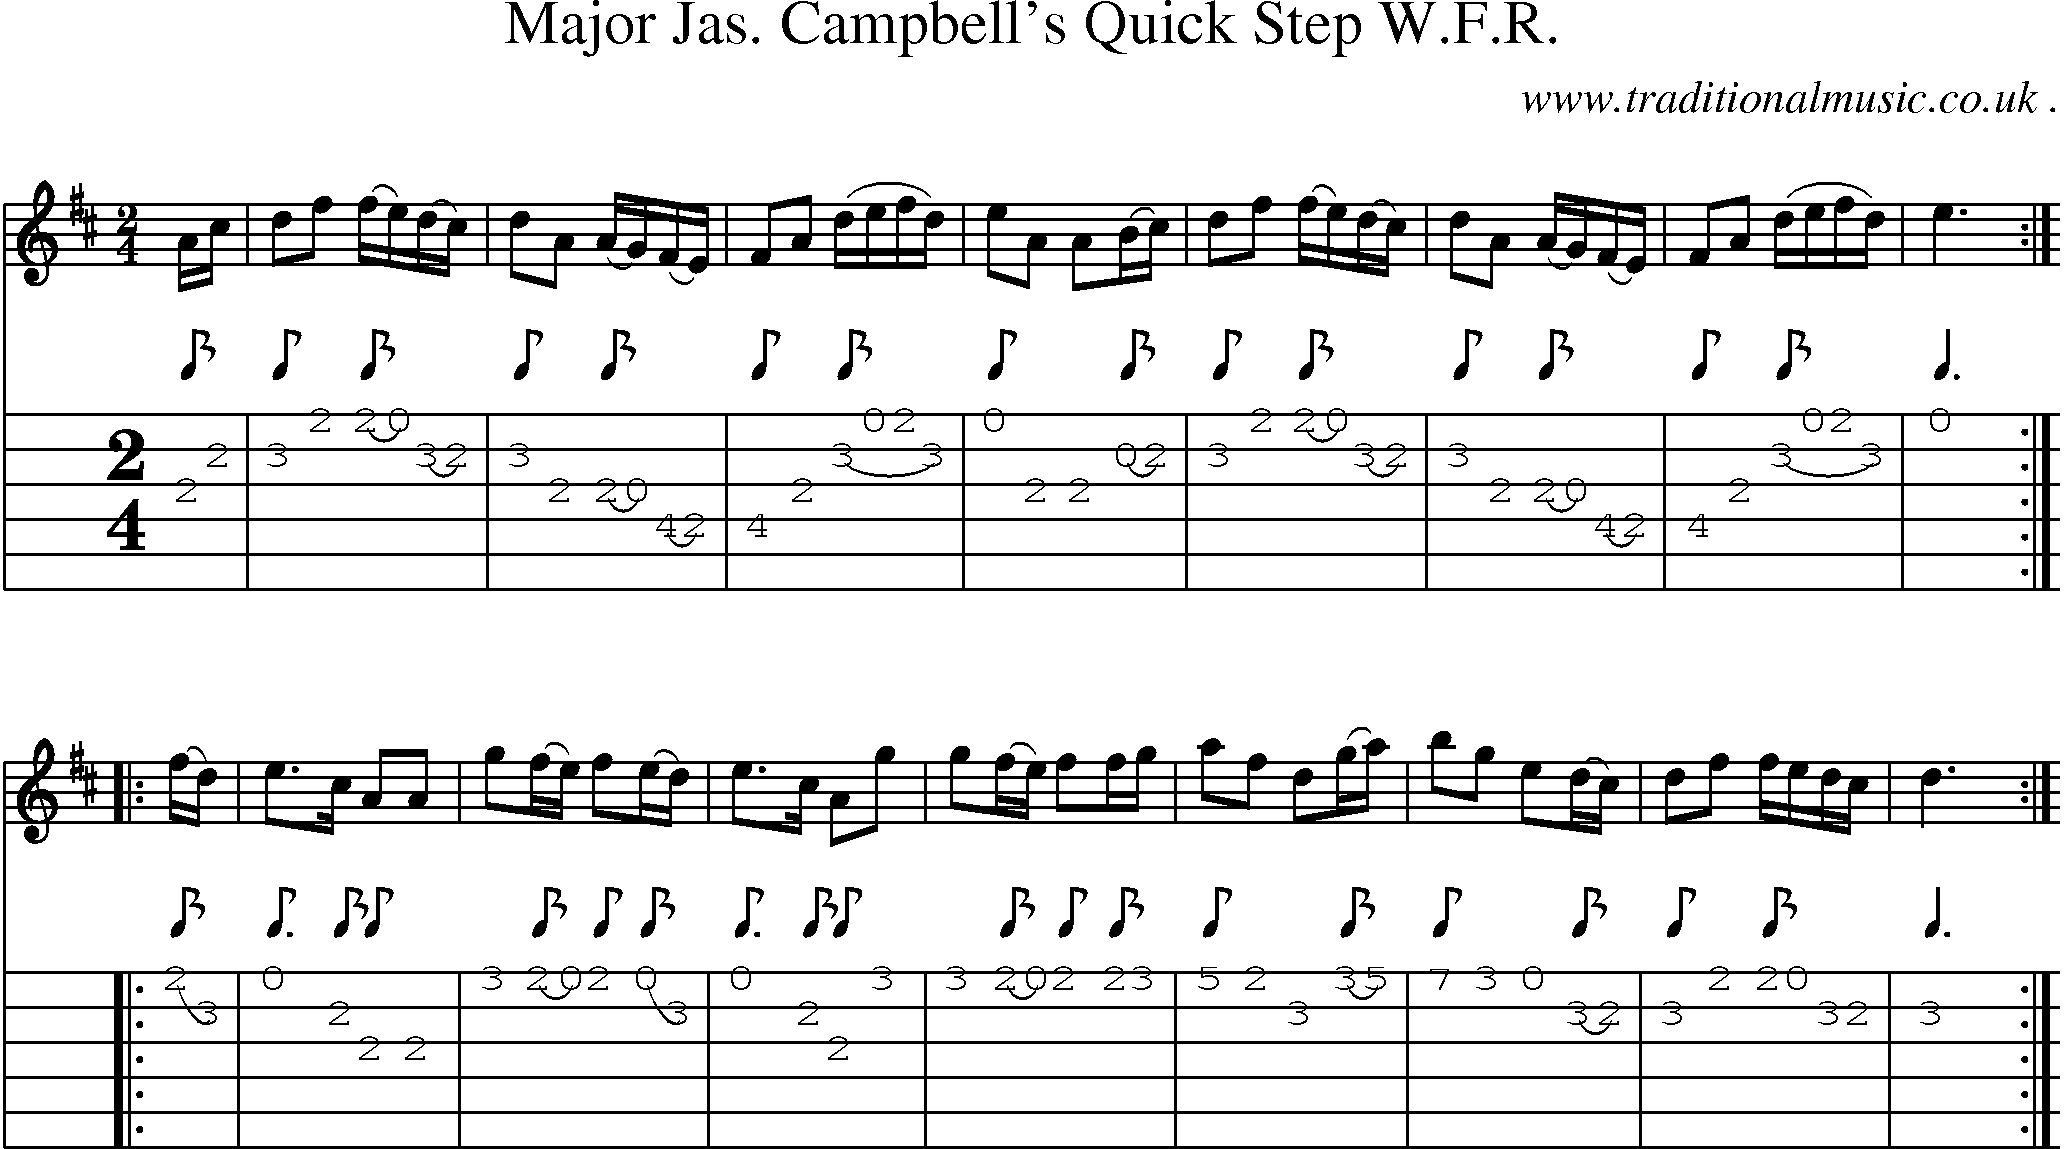 Sheet-Music and Guitar Tabs for Major Jas Campbells Quick Step Wfr